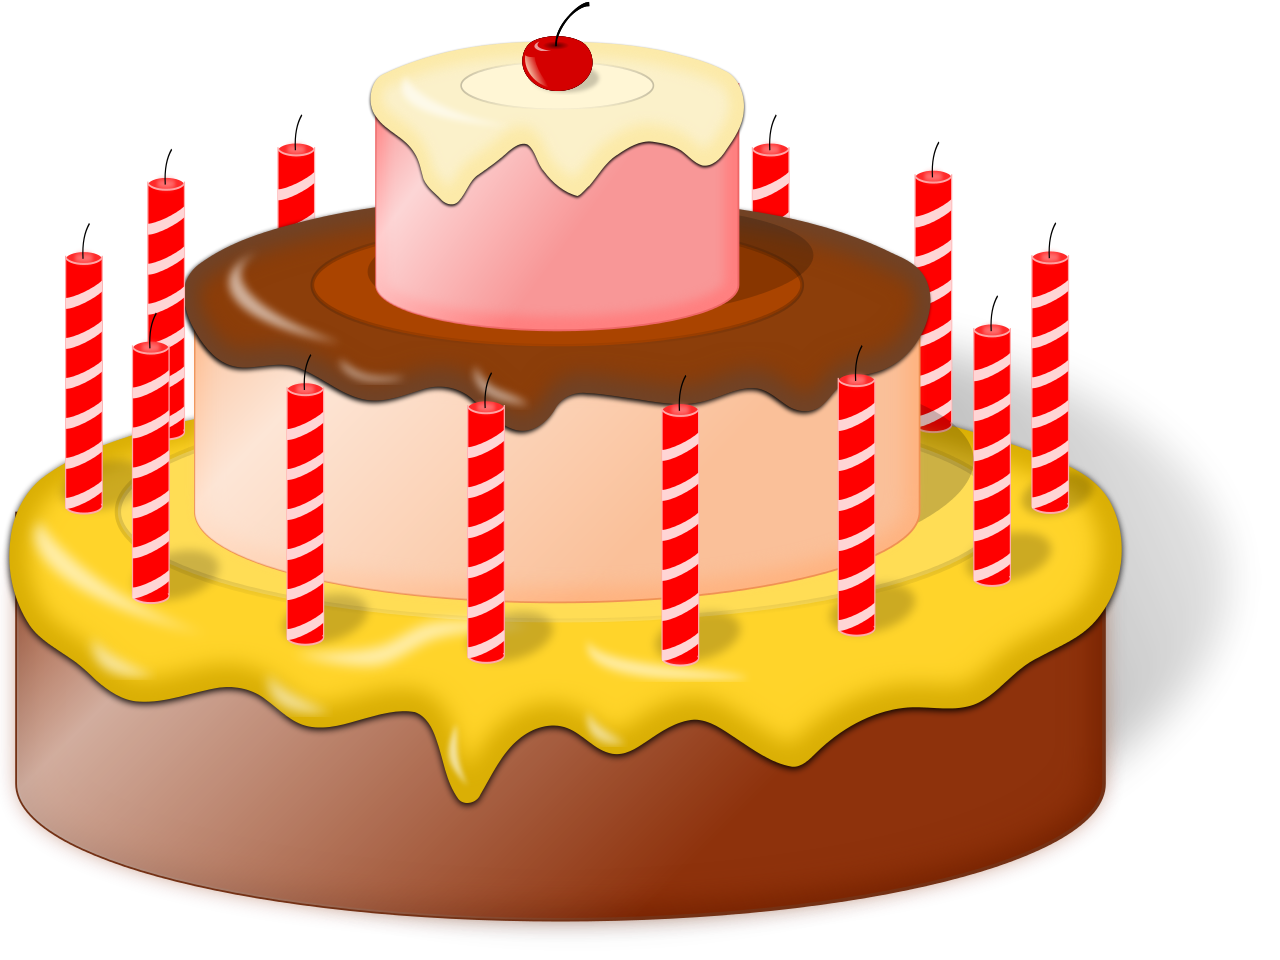 Download File:Birthday-cake-153106.svg - Wikimedia Commons